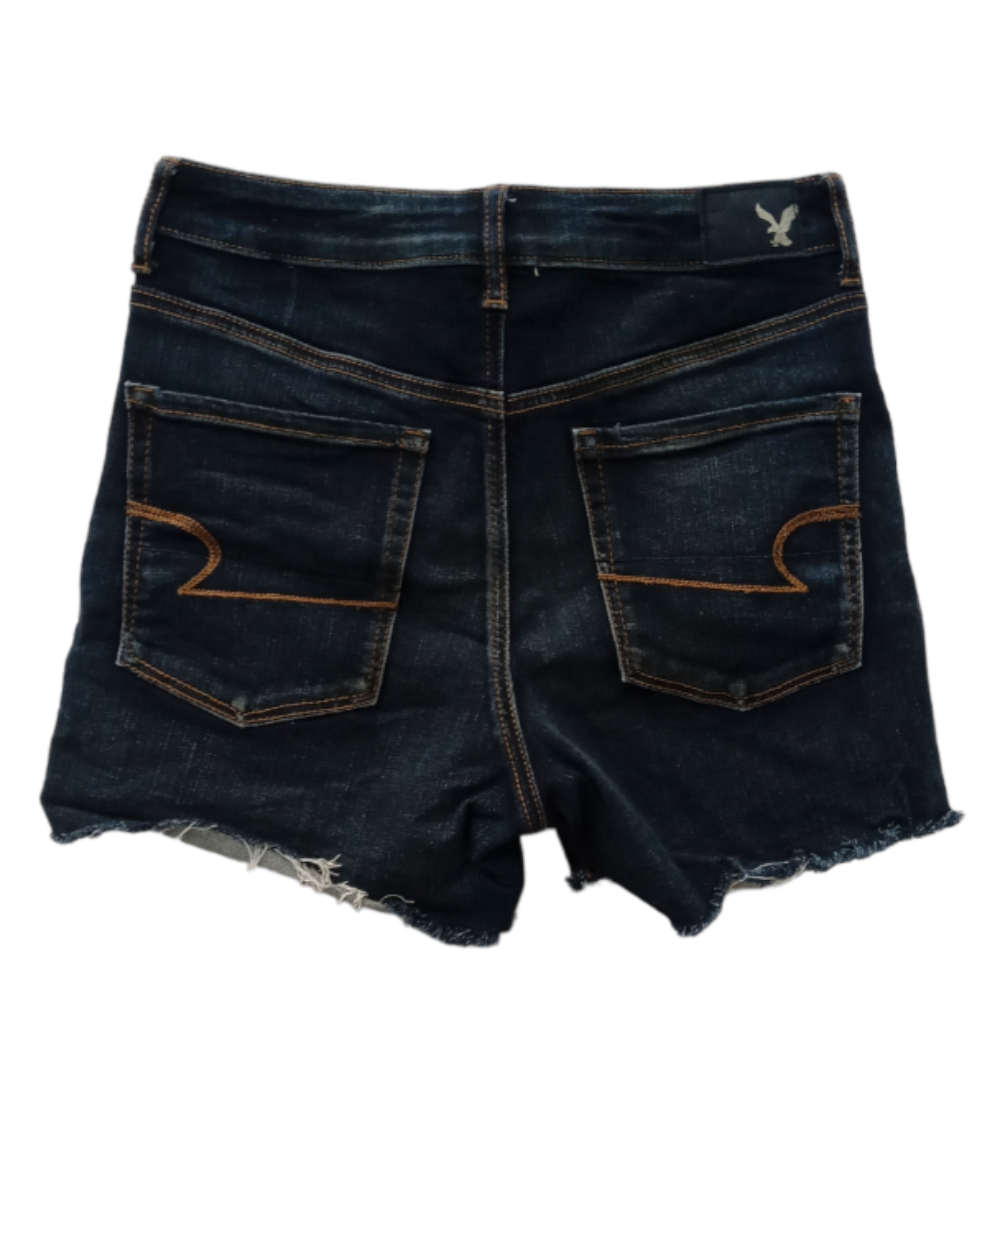 Shorts Jeans American Eagle Outfitters